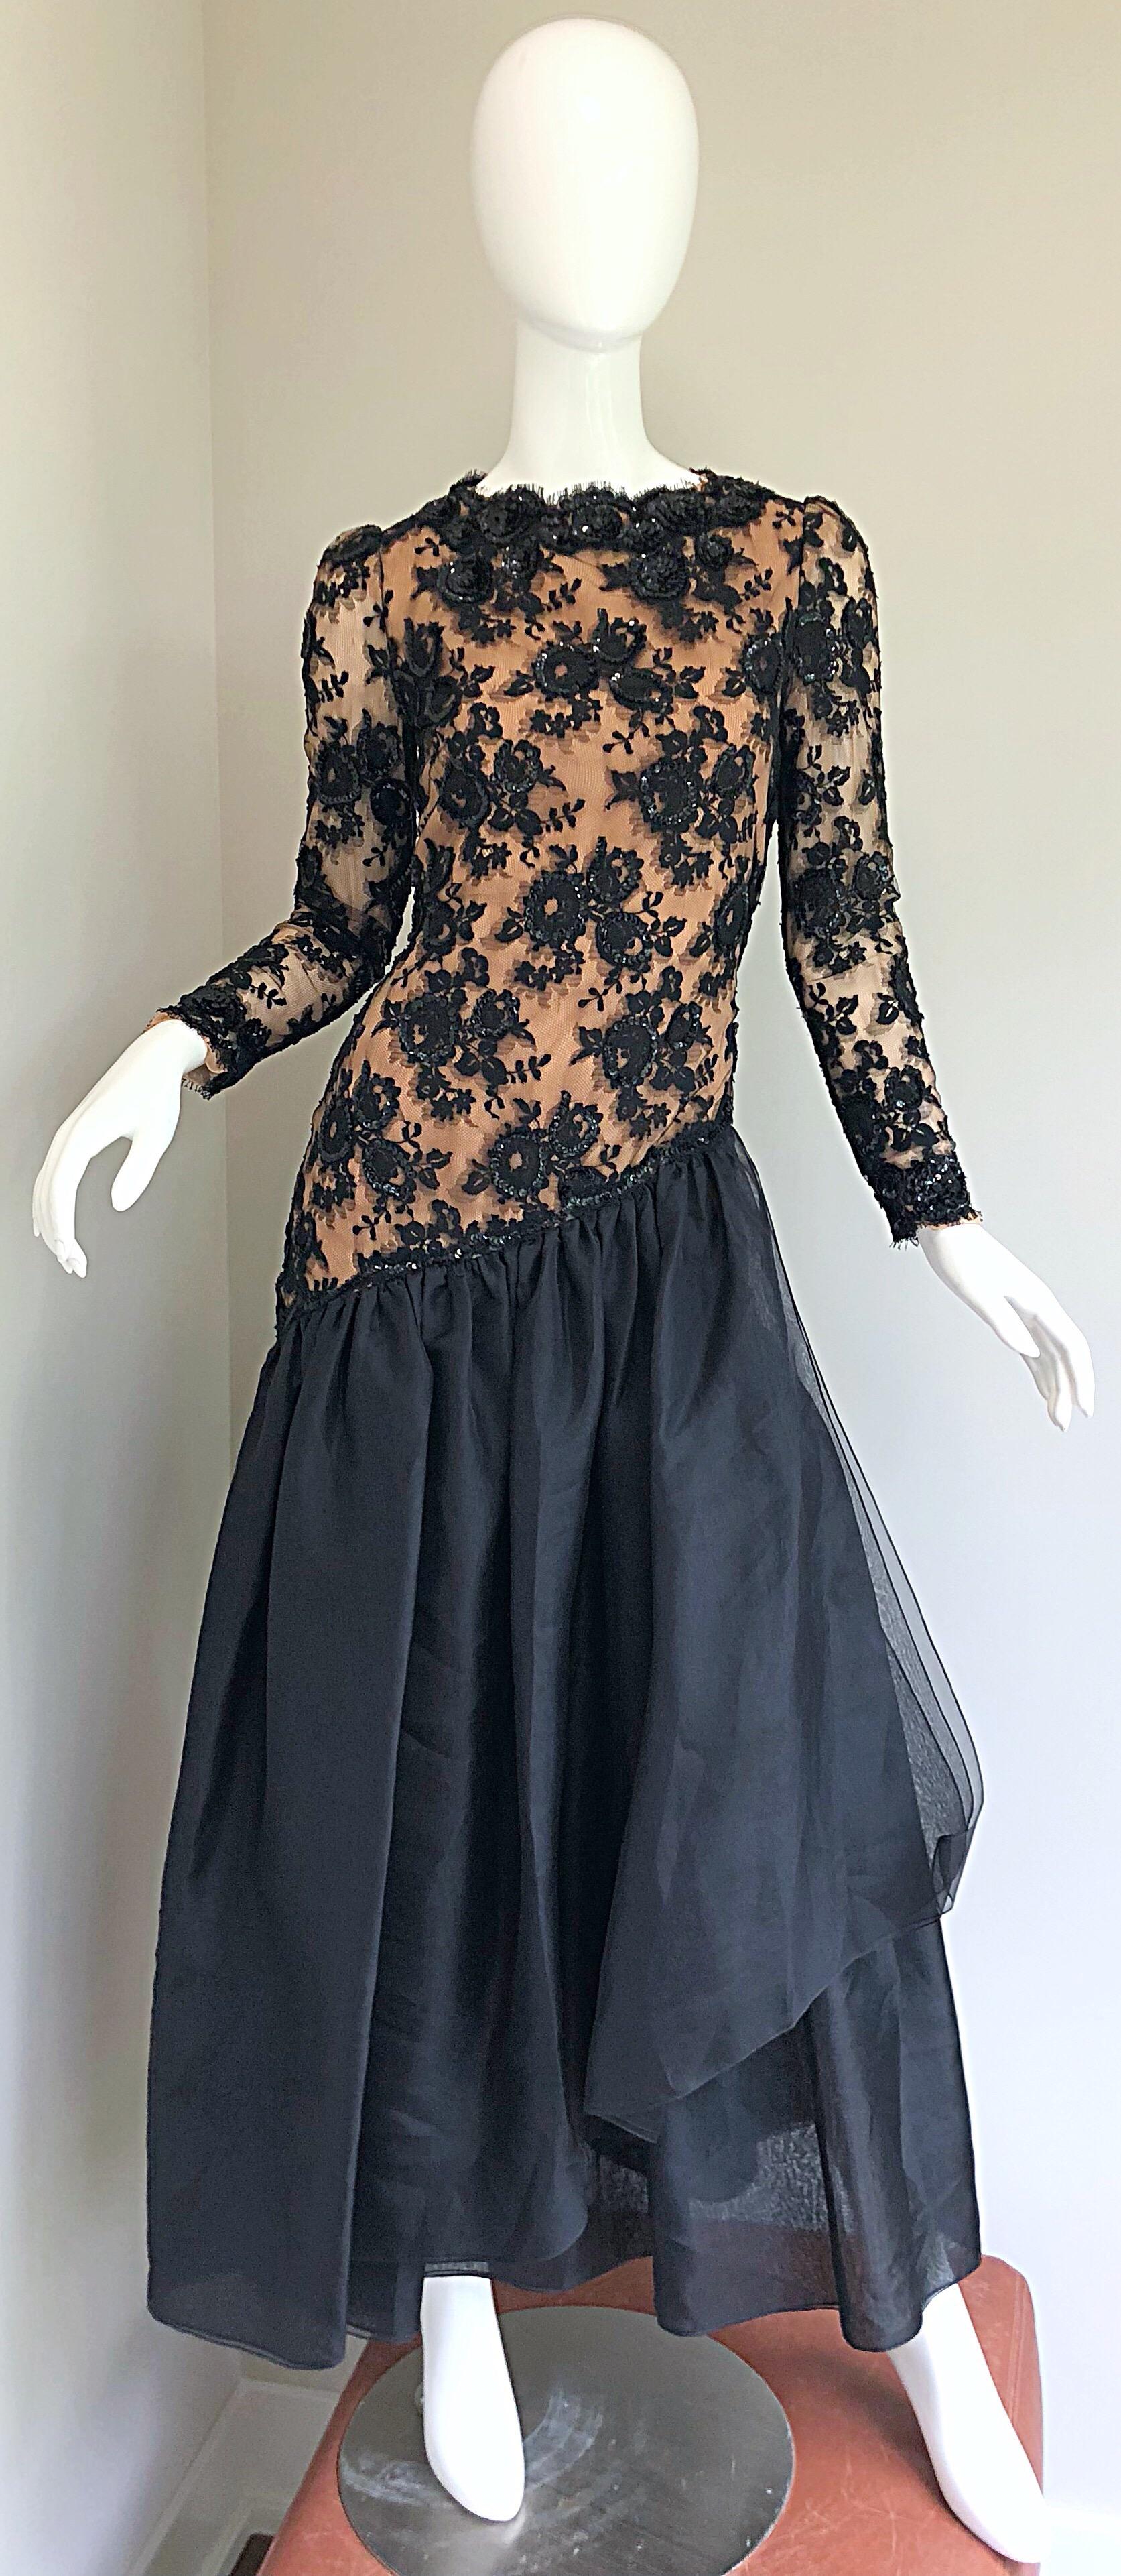 Gorgeous vintage 1990s BILL BLASS black French lace and nude silk chiffon sequined mermaid hem long sleeve drop waist evening gown! Features a fitted bodice with nude chiffon underlay, and black French lace over. Hundreds of hand-sewn black sequins